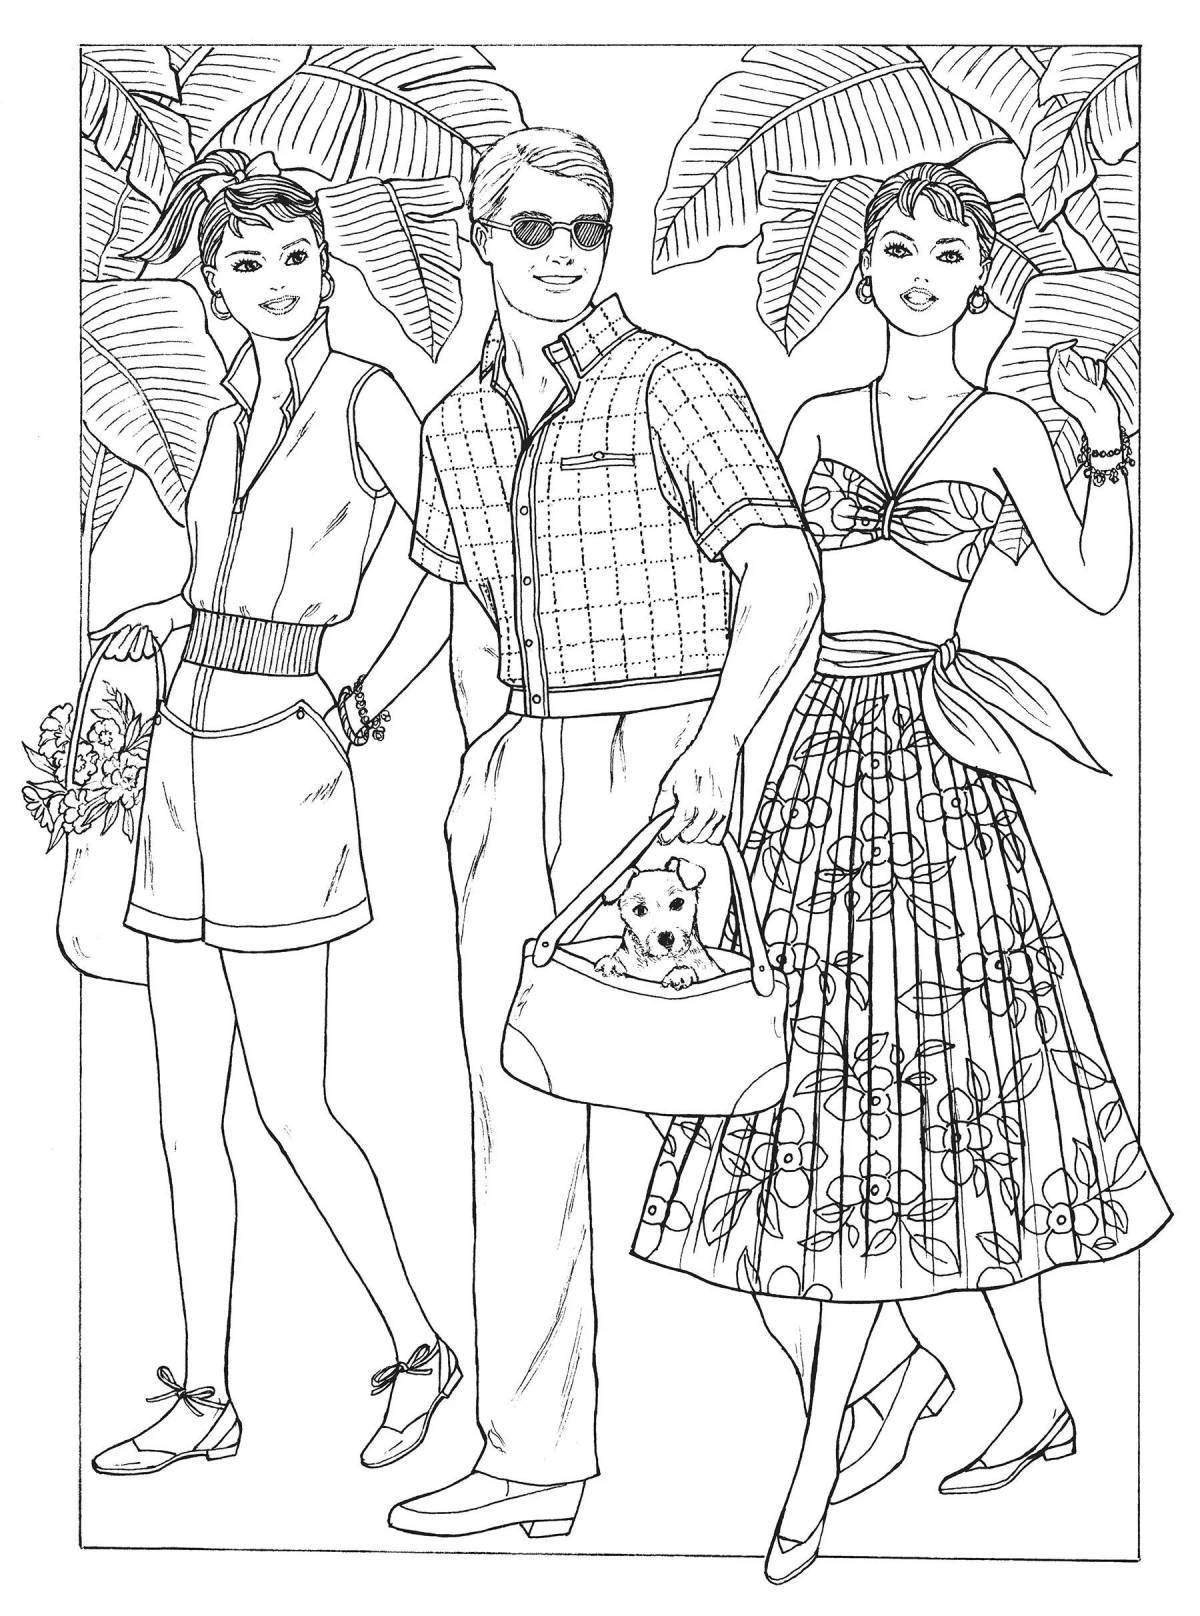 Adorable people coloring pages for girls